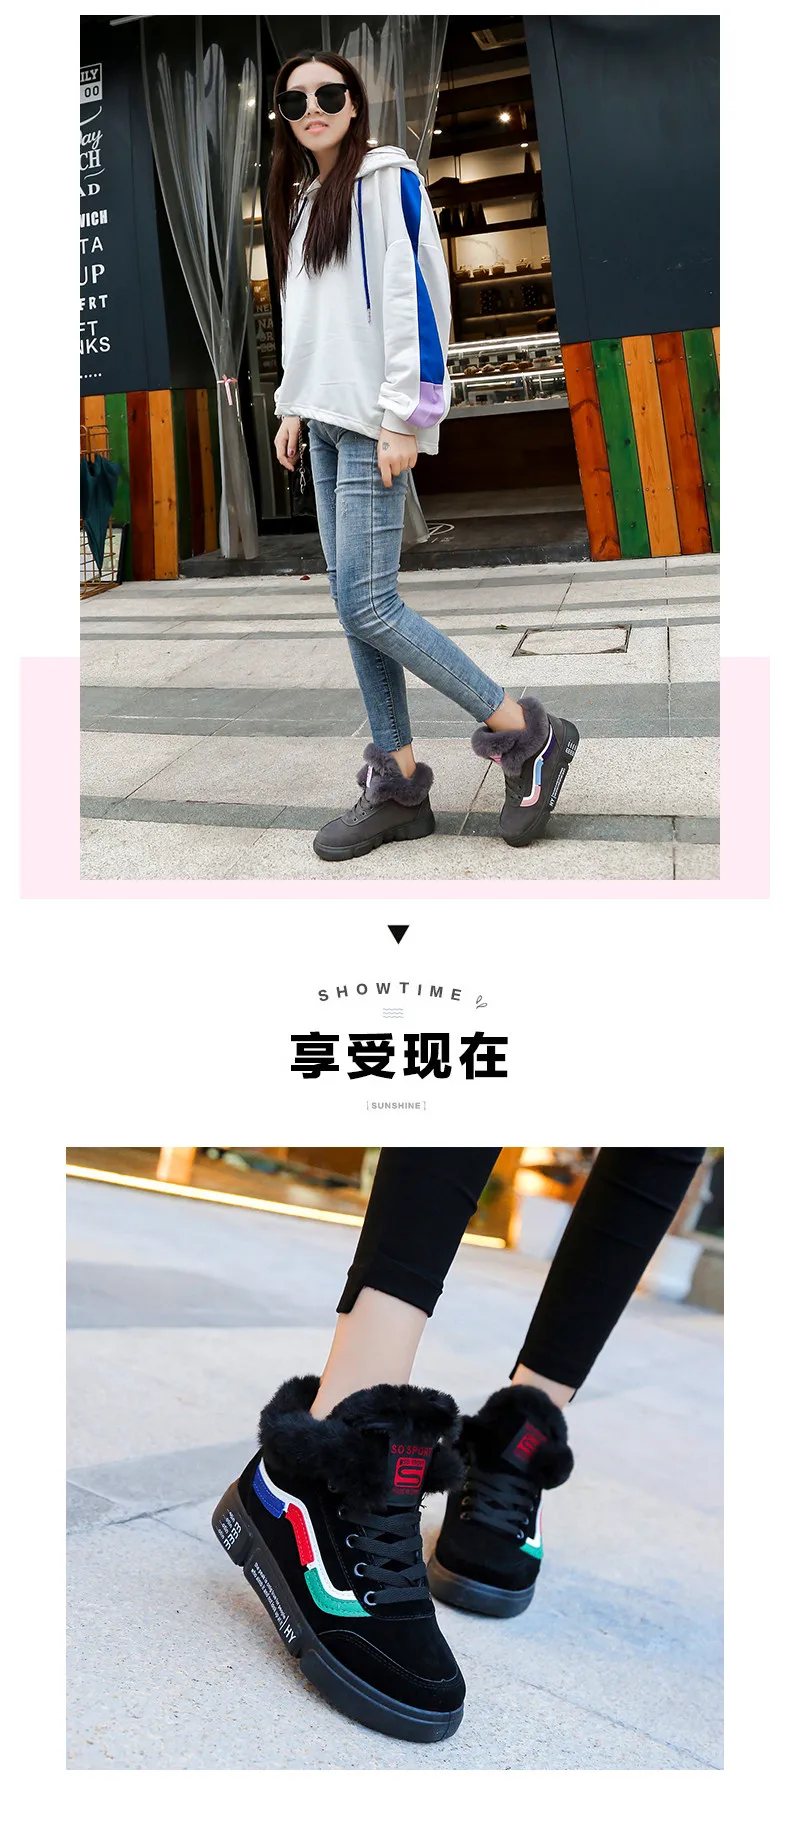 Women Casual Shoes High Top Boots Winter Woman Shoes Fashion Brand Sneakers Vulcanize Shoes Outdoor Warm Lace-Up Walking Shoes